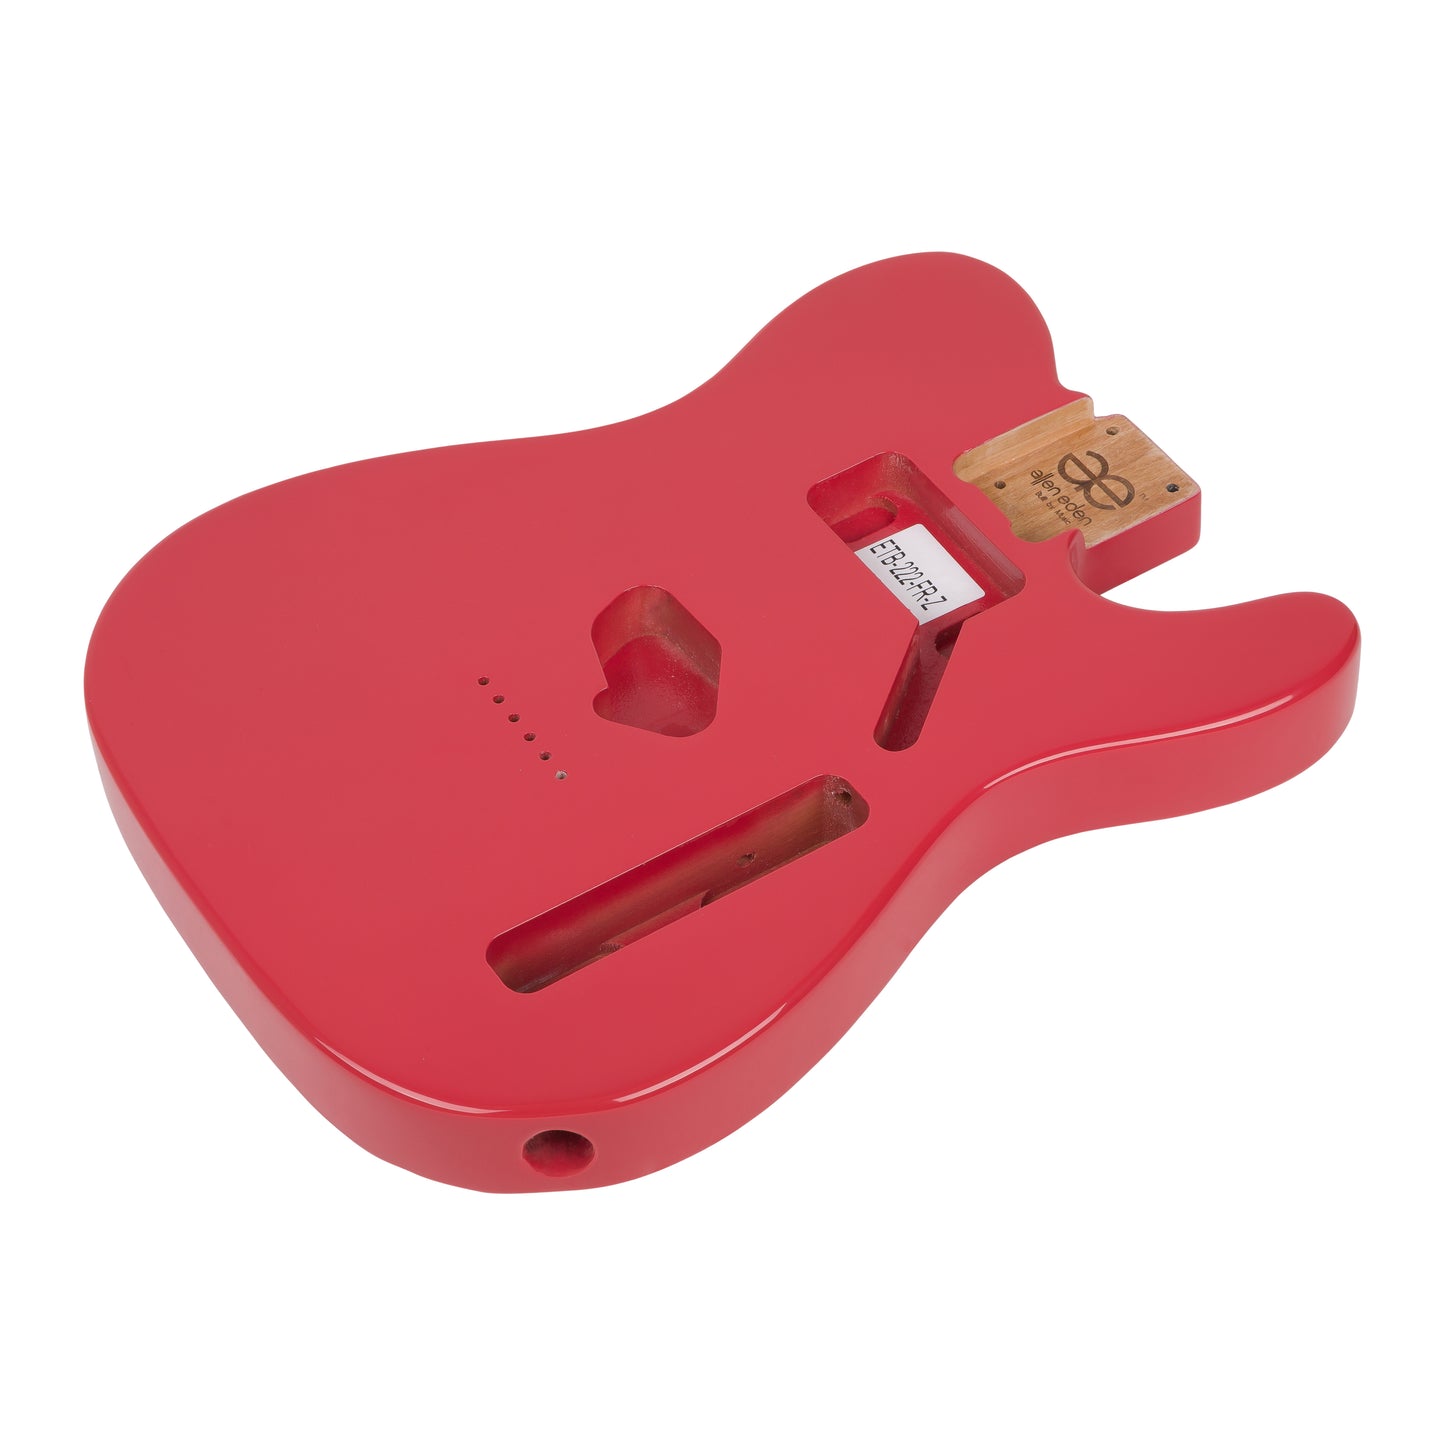 AE Guitars® T-Style Alder Replacement Guitar Body Fire Engine Red